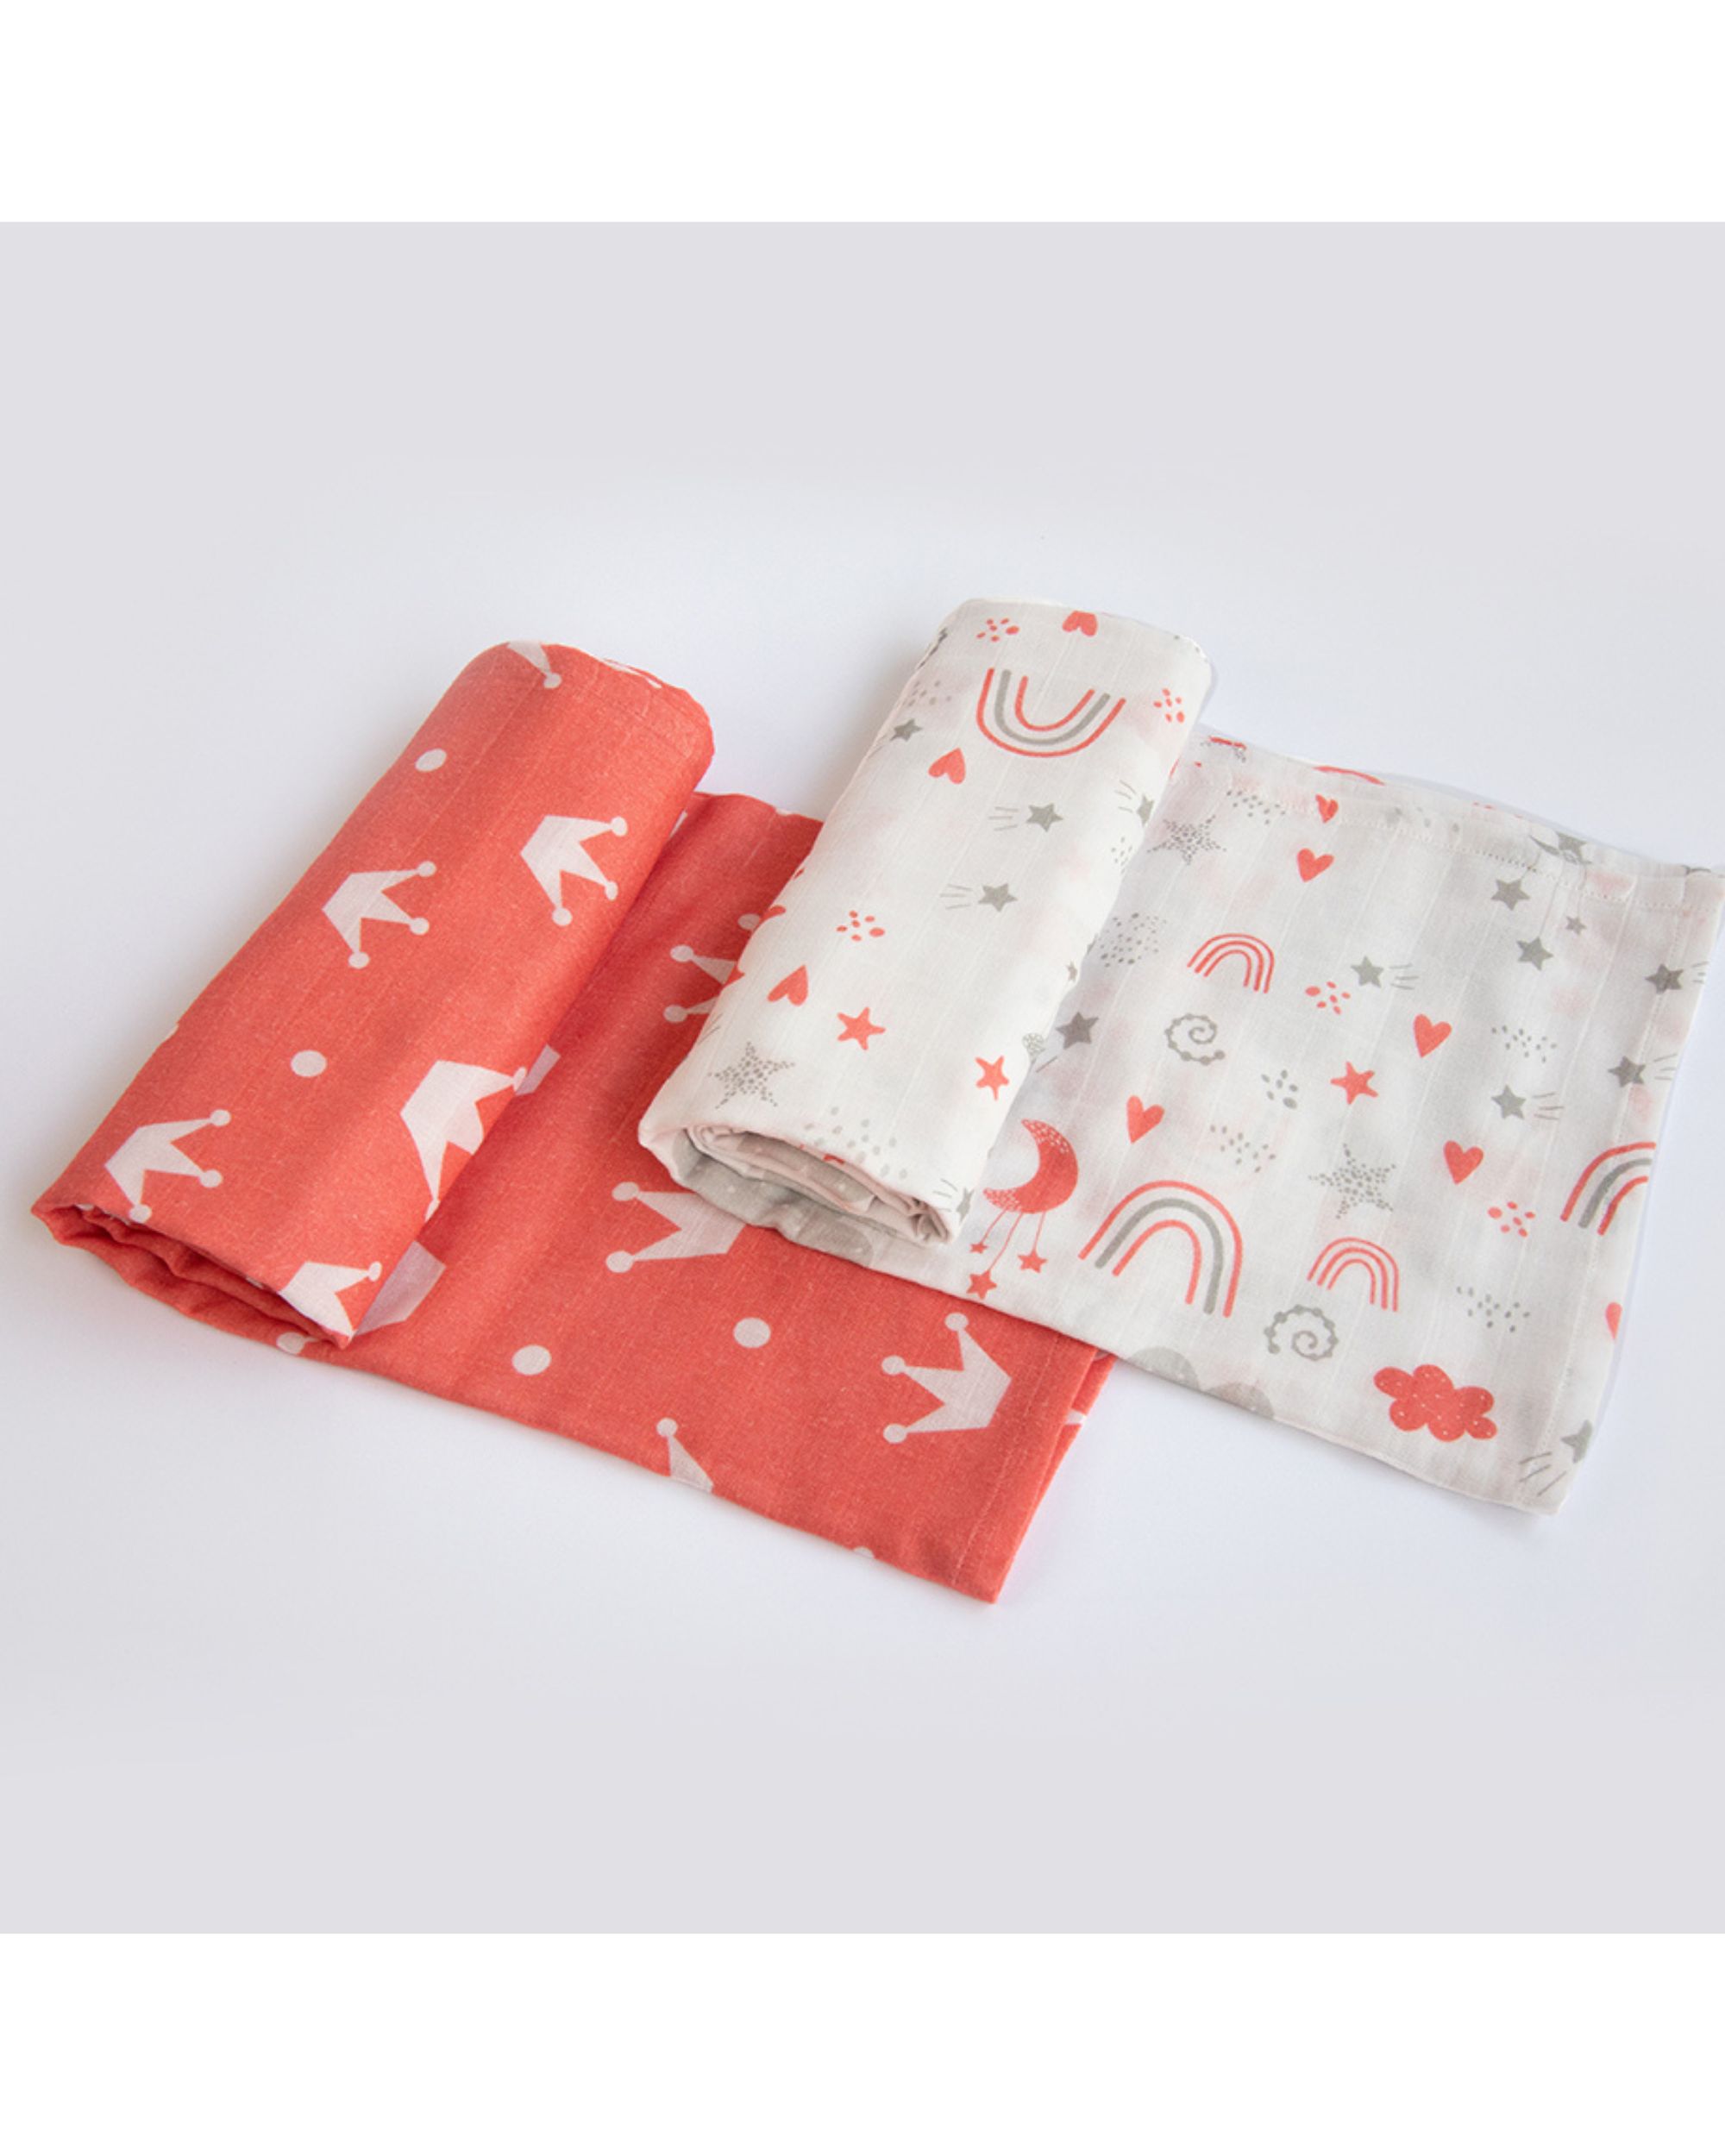 Magical rainbow and red crown muslin swaddle - set of two